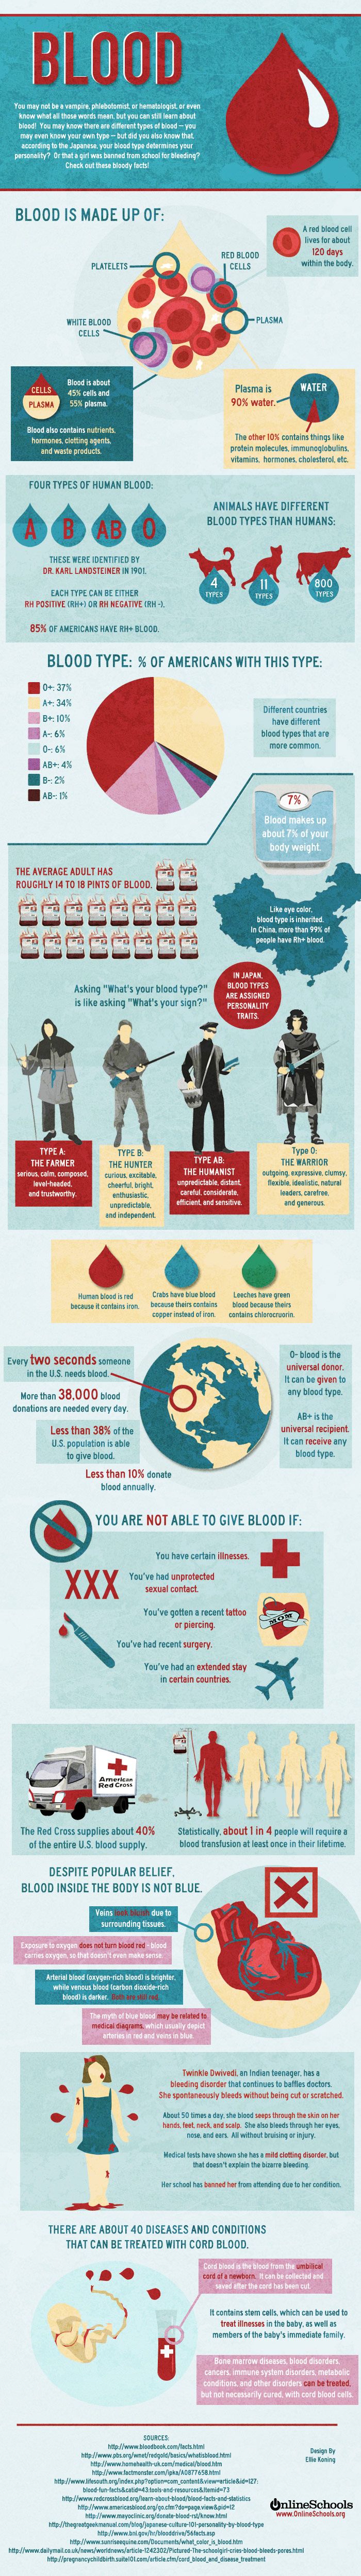 Facts About Blood (infographic)